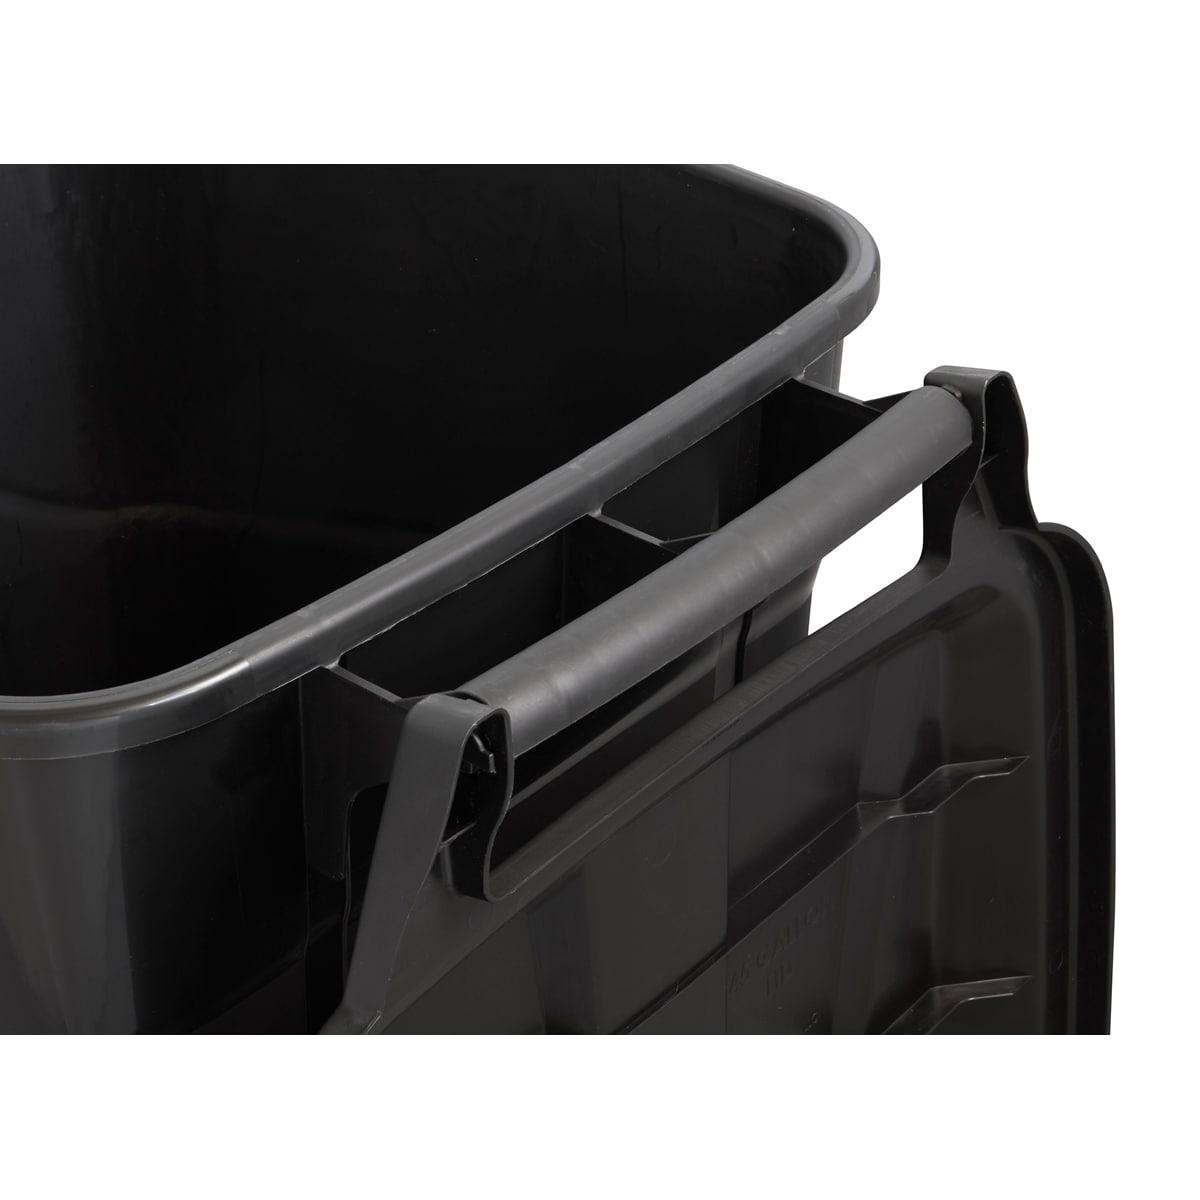 Roughneck 45 Gal. Black Wheeled Vented Trash Can with Lid